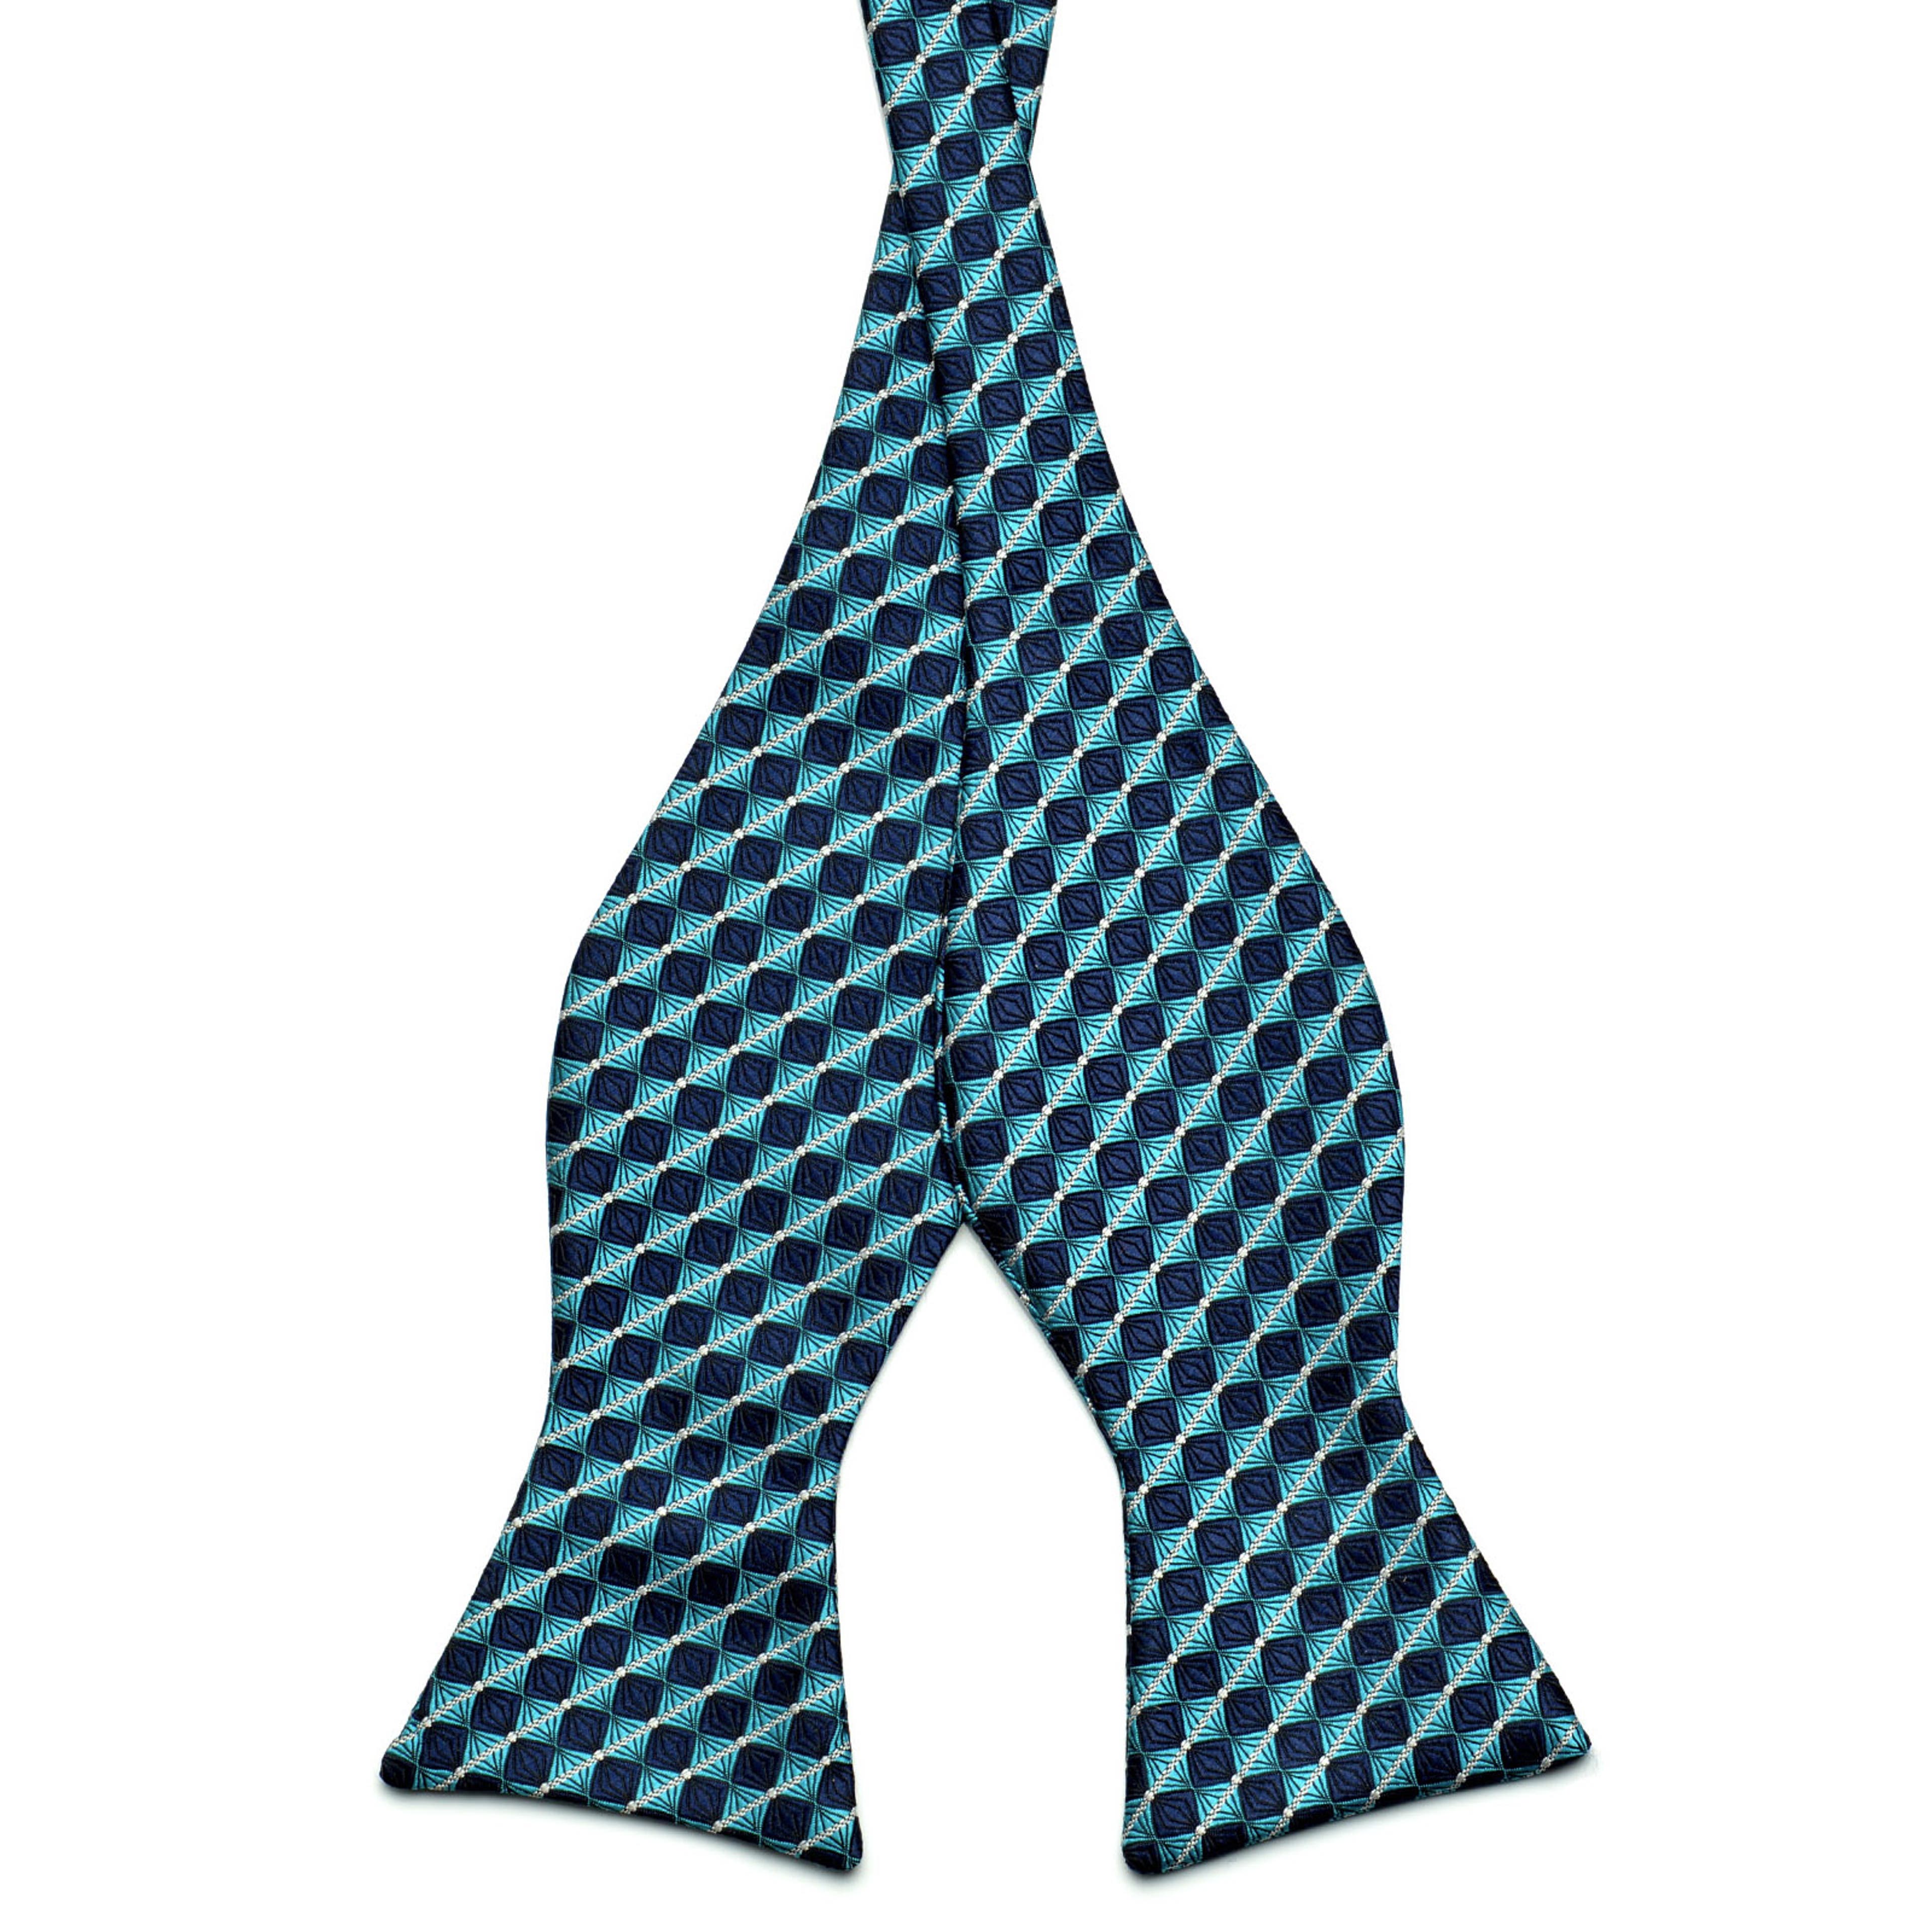 Turquoise & Navy Blue Chequered Microfiber Self-Tie Bow Tie